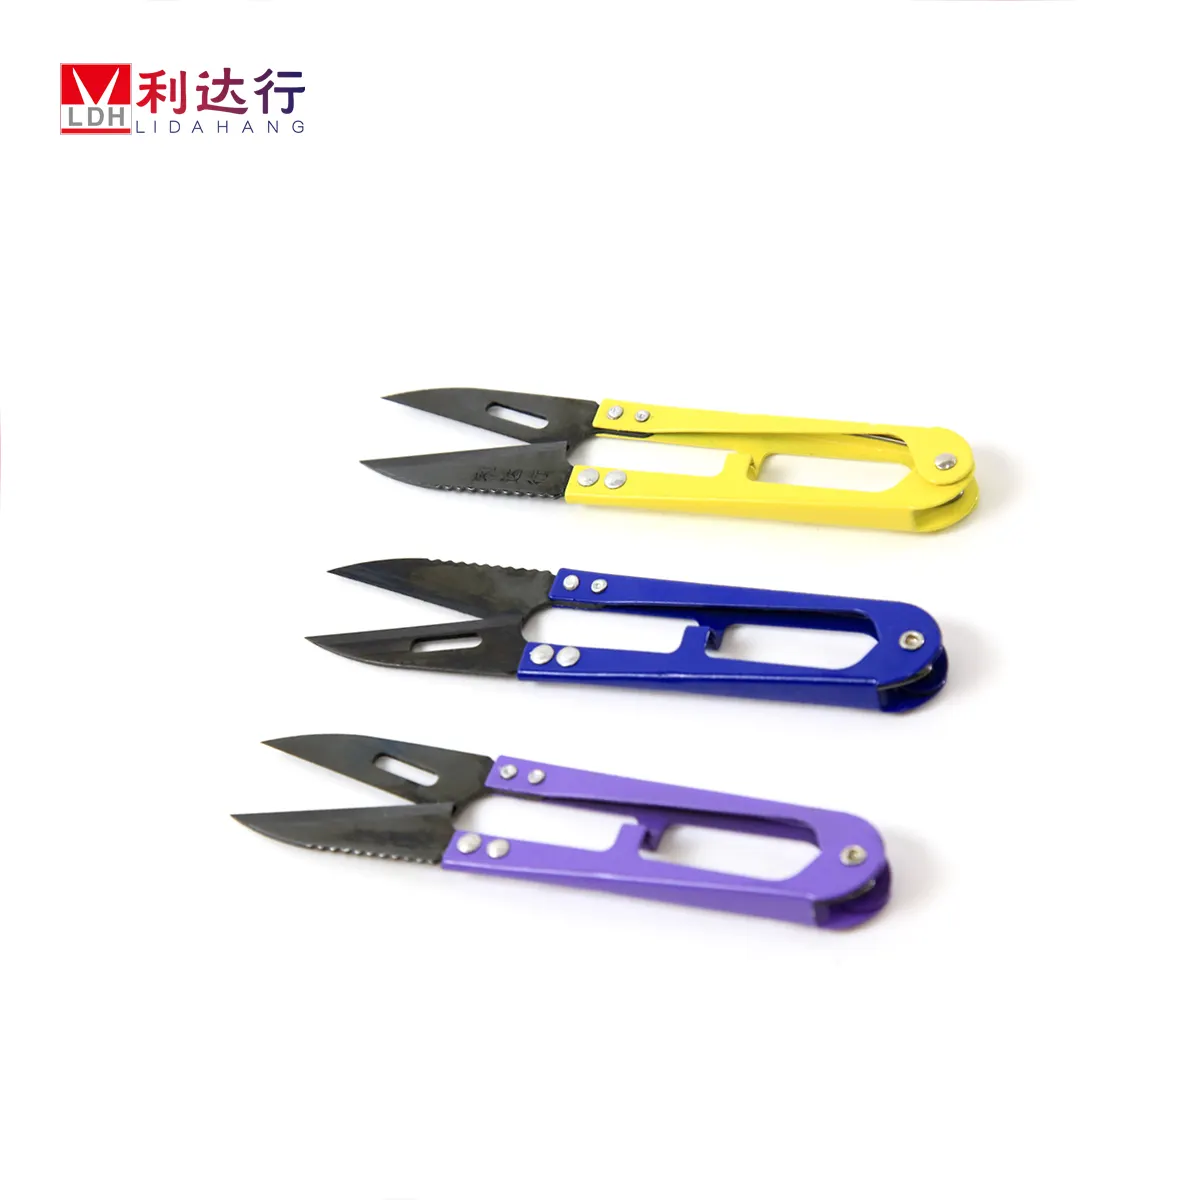 Extra Sharp Cutting Micro Nut Left Handed Oxidative Blackening For Textile Yarn Clipper Thread Cutter Trimmer